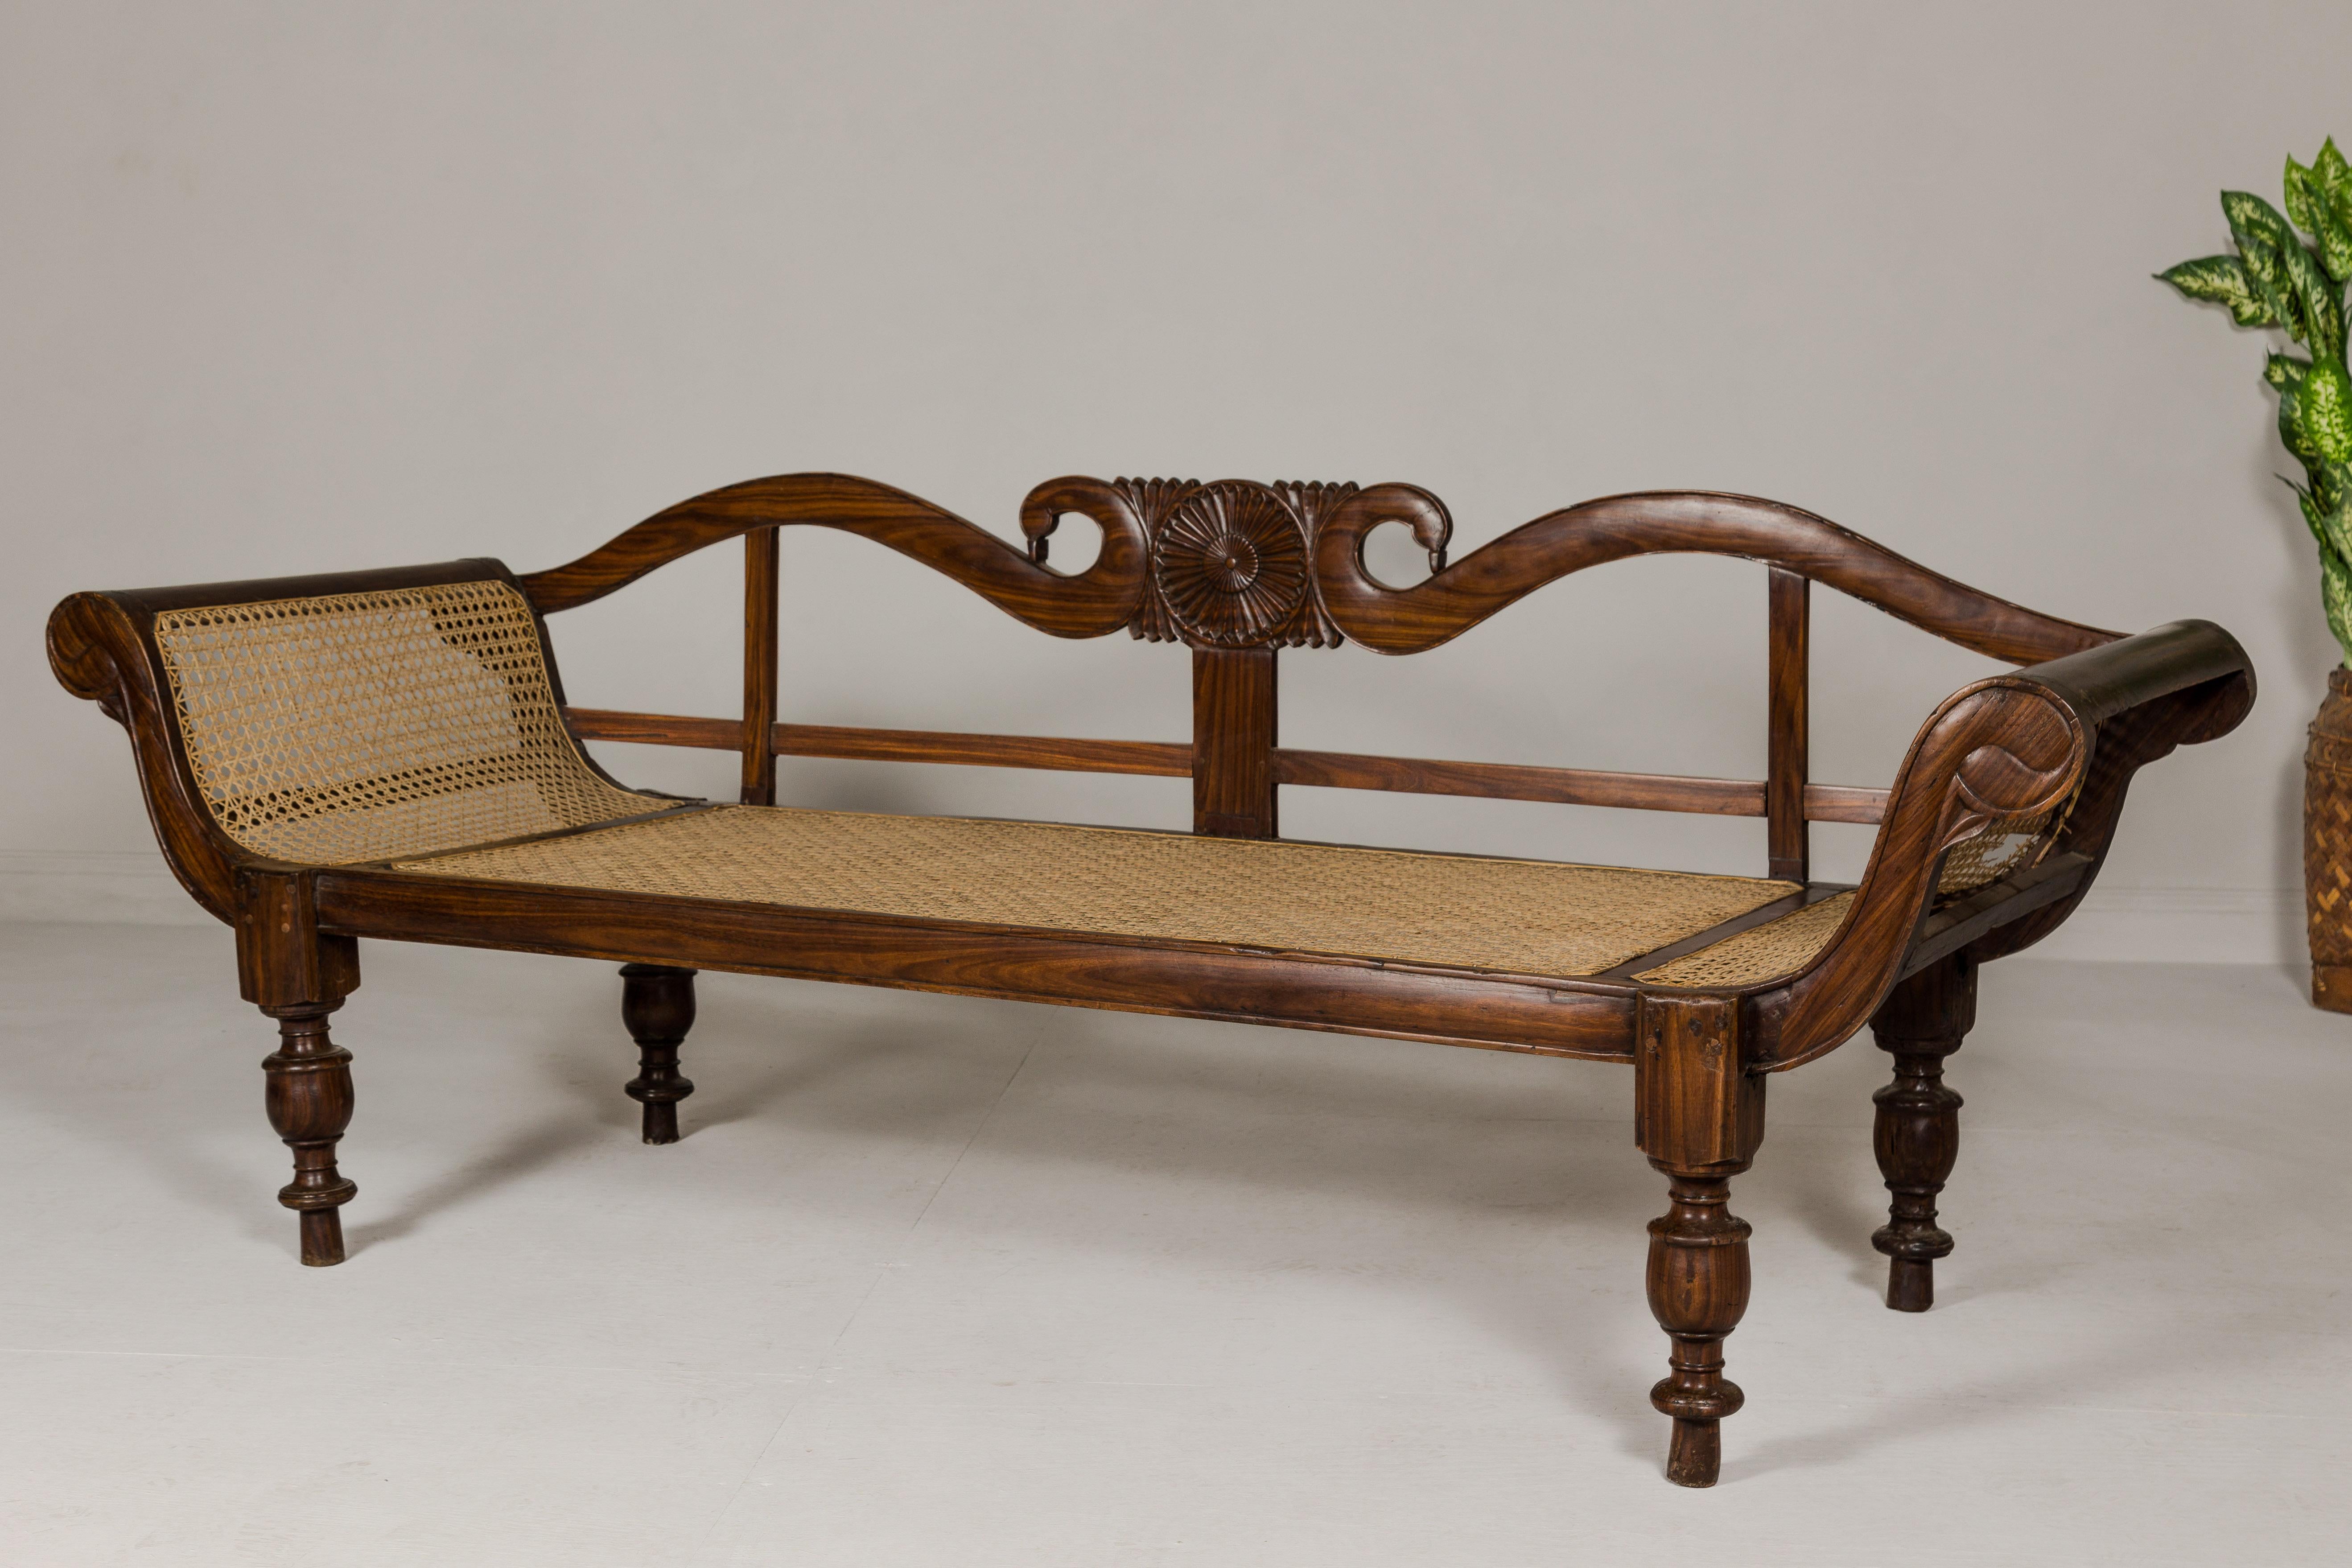 British Colonial Carved and Cane Settee with Swan Neck Back and Scrolling Arms For Sale 6